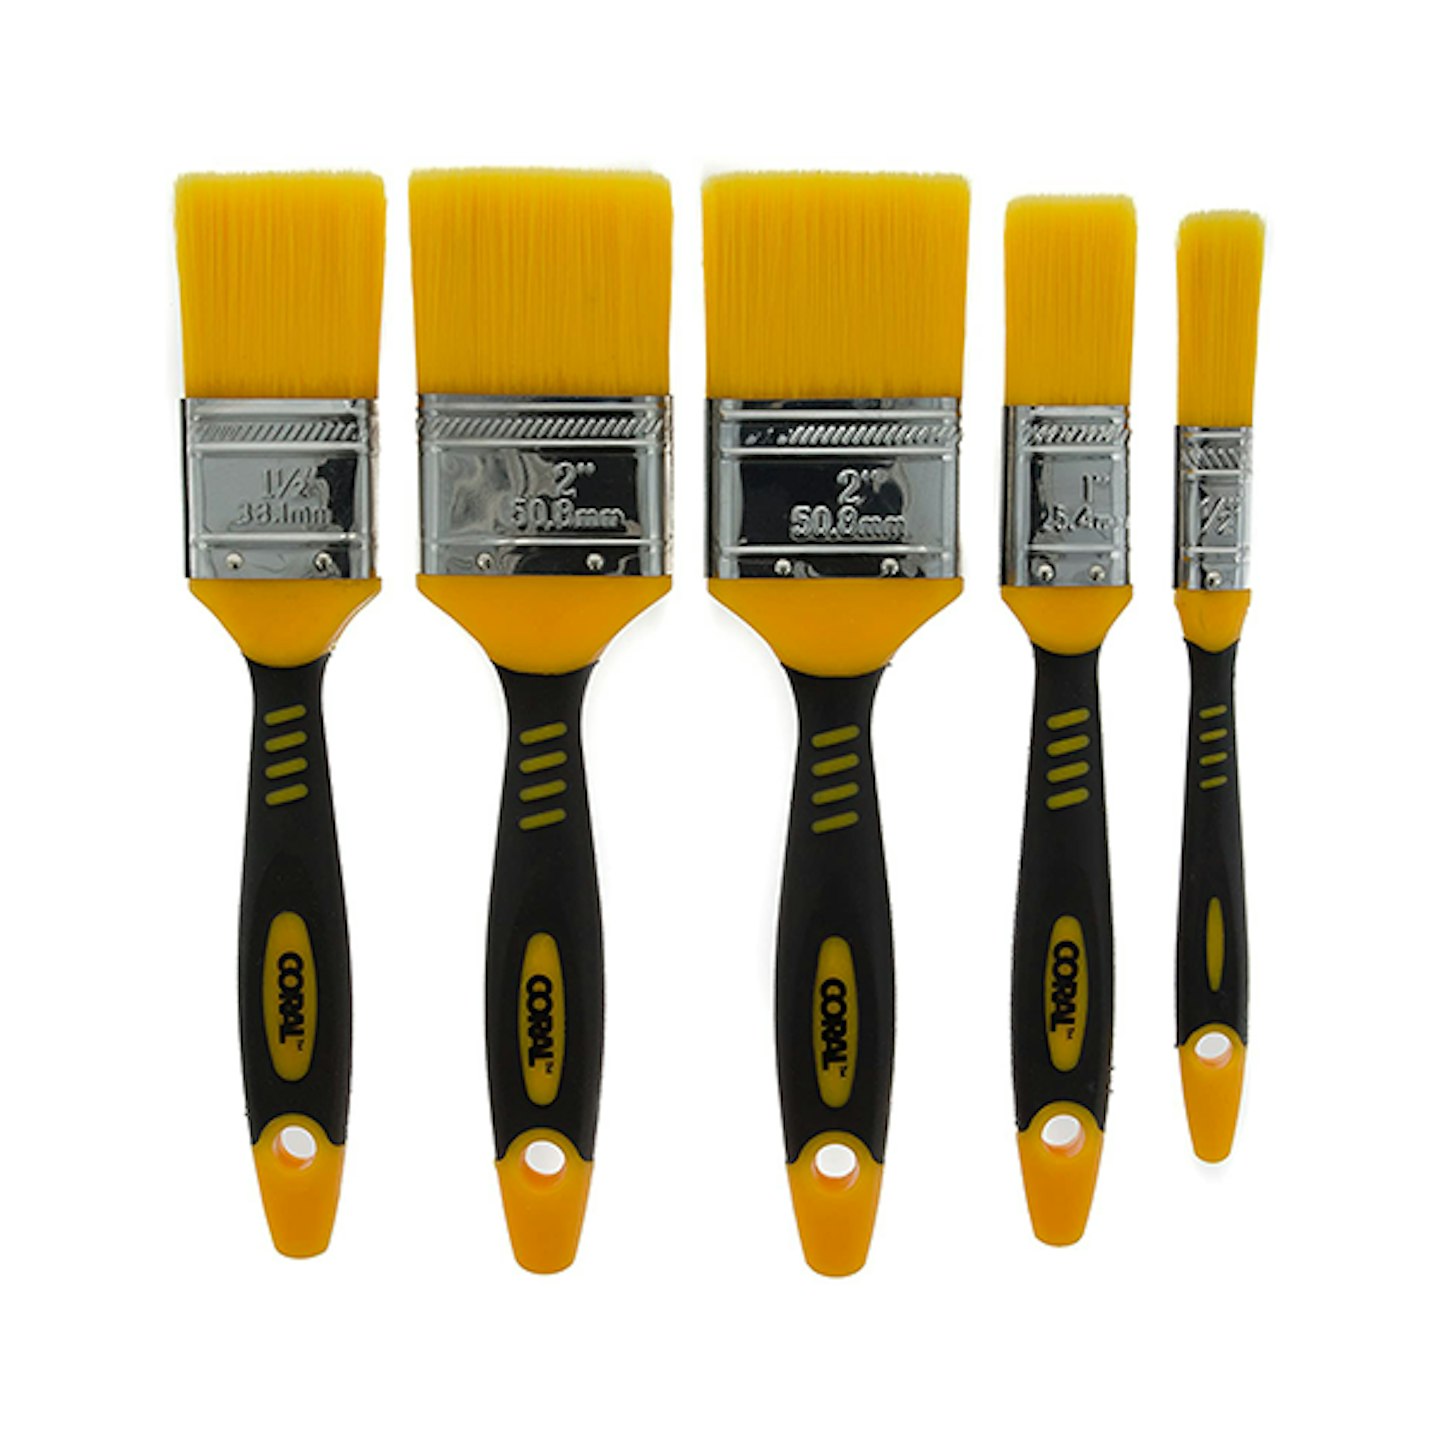 Coral 31417 Zero Paint Brushes with No Loss of Bristle Paintbrush Heads 5 Piece Pack Set, Yellow, Set of 5